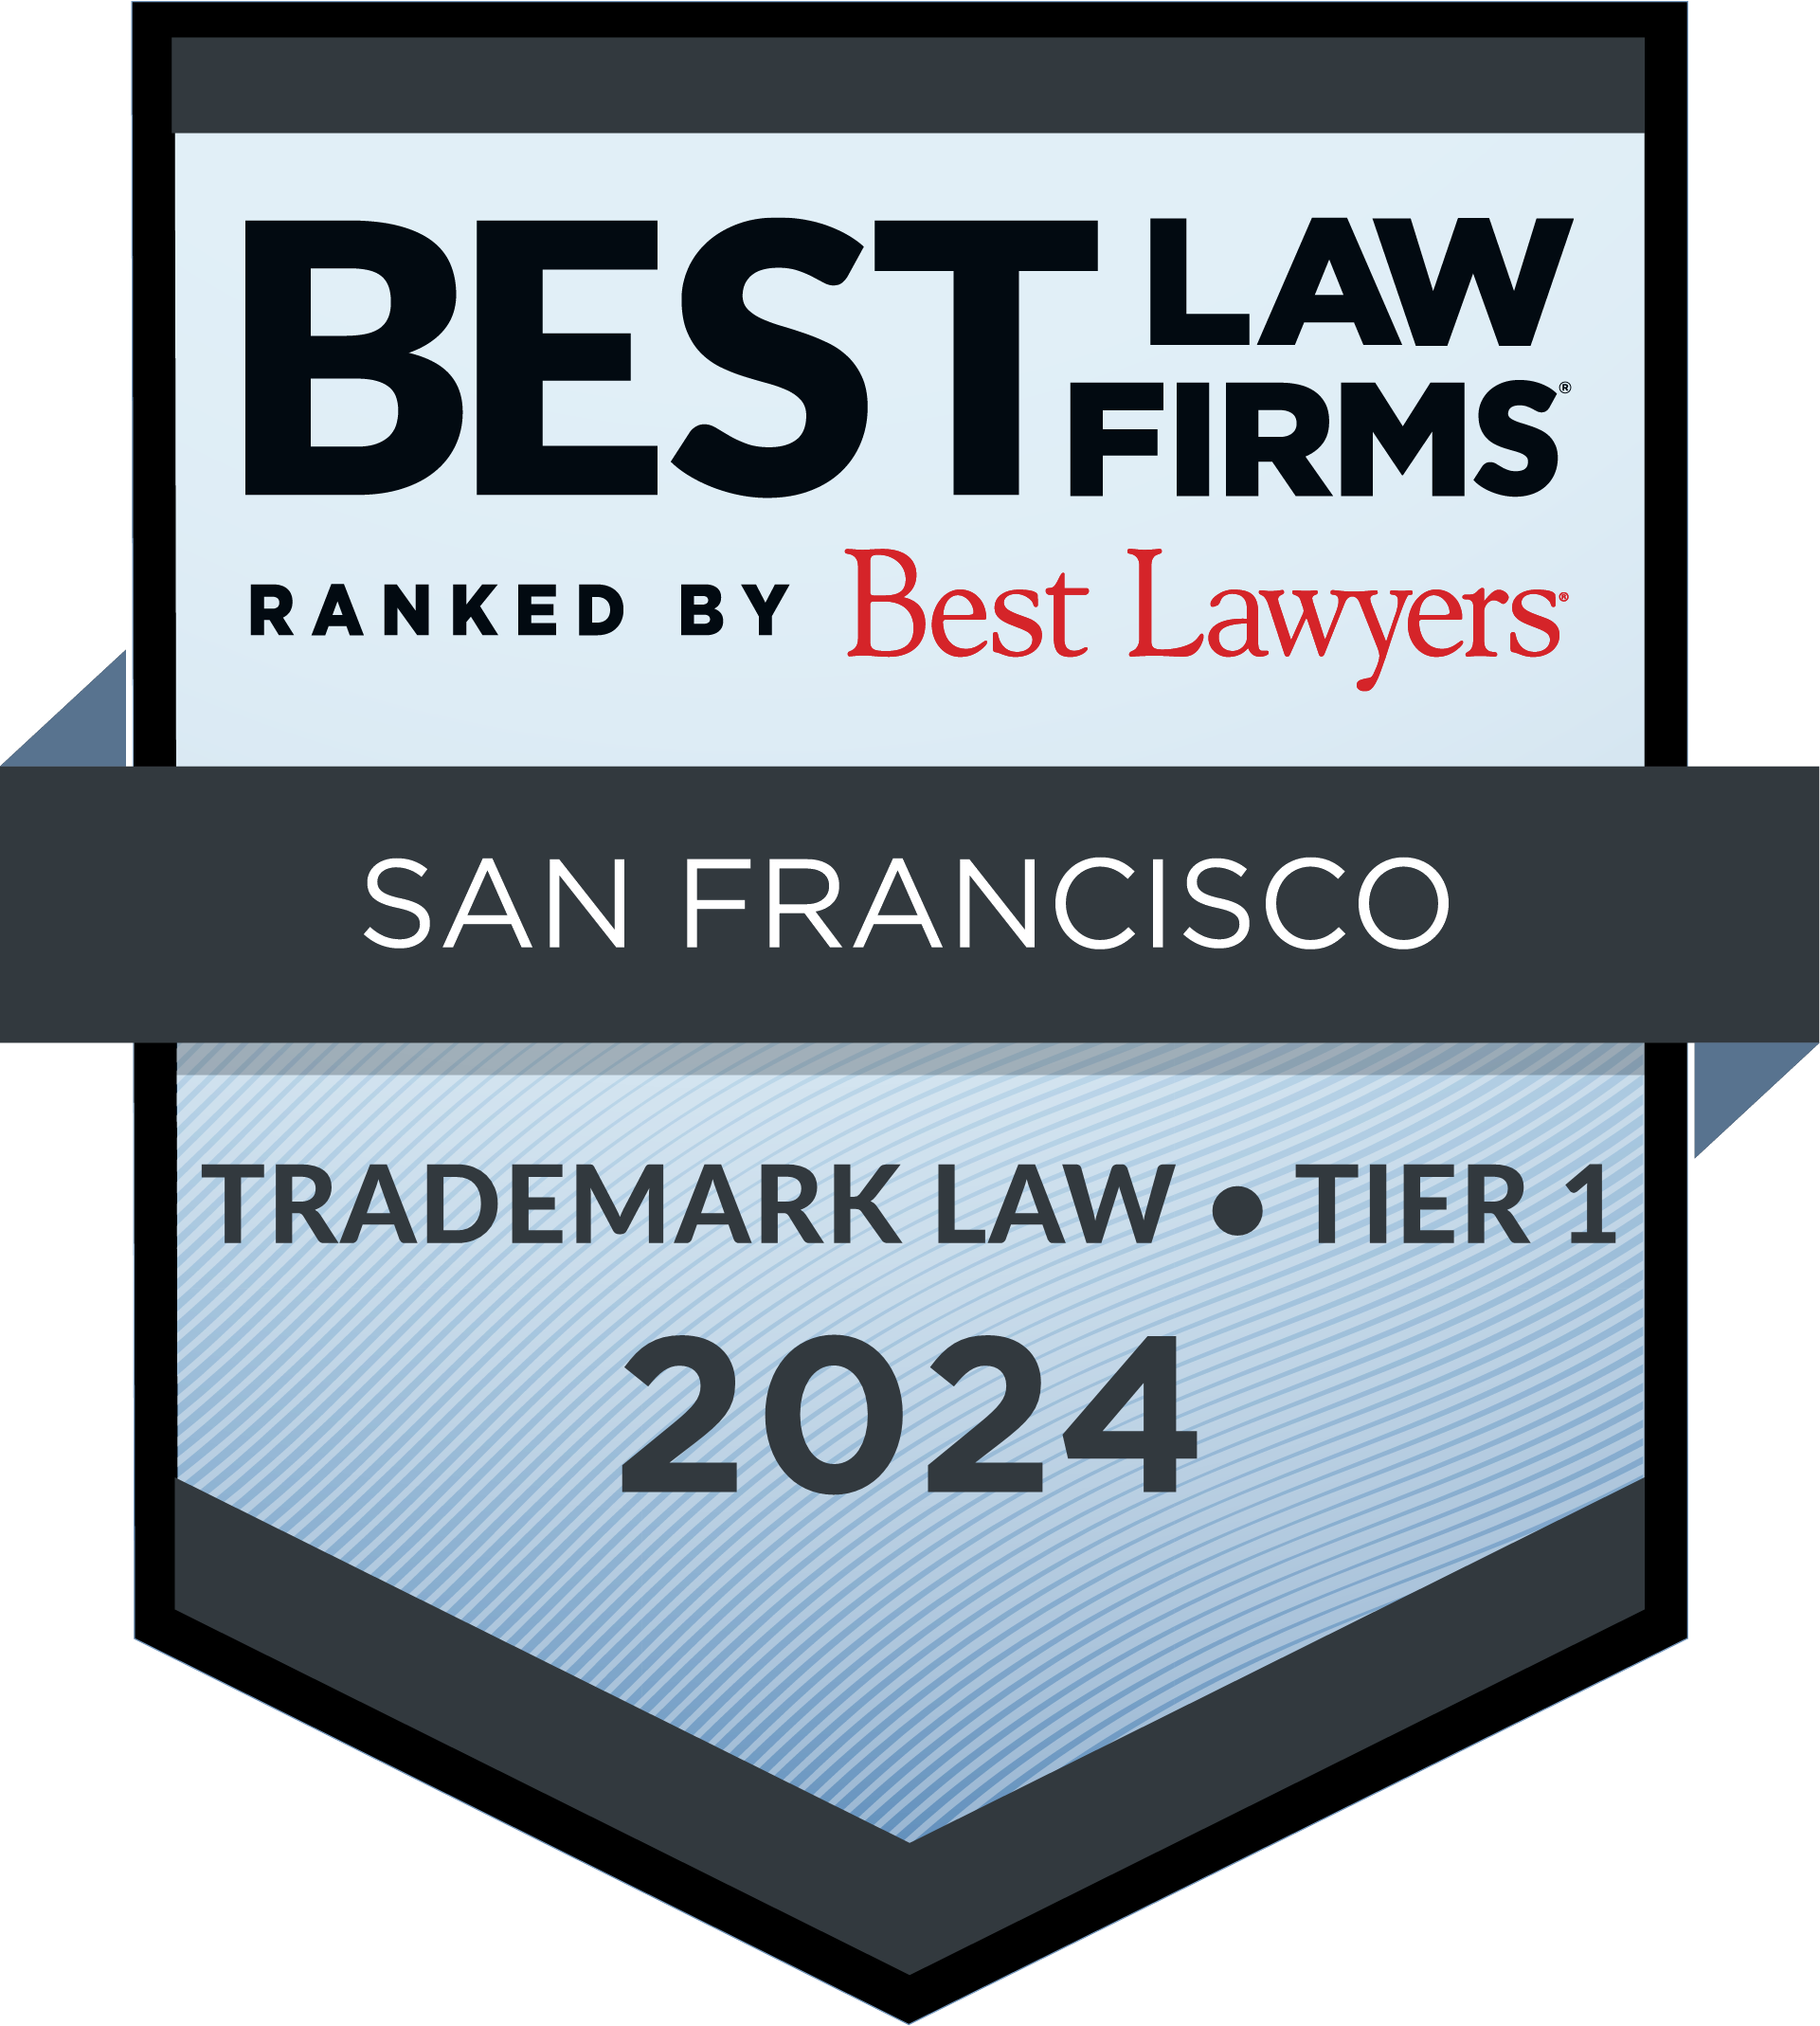 Award badge for Best Law Firms Trademark Law